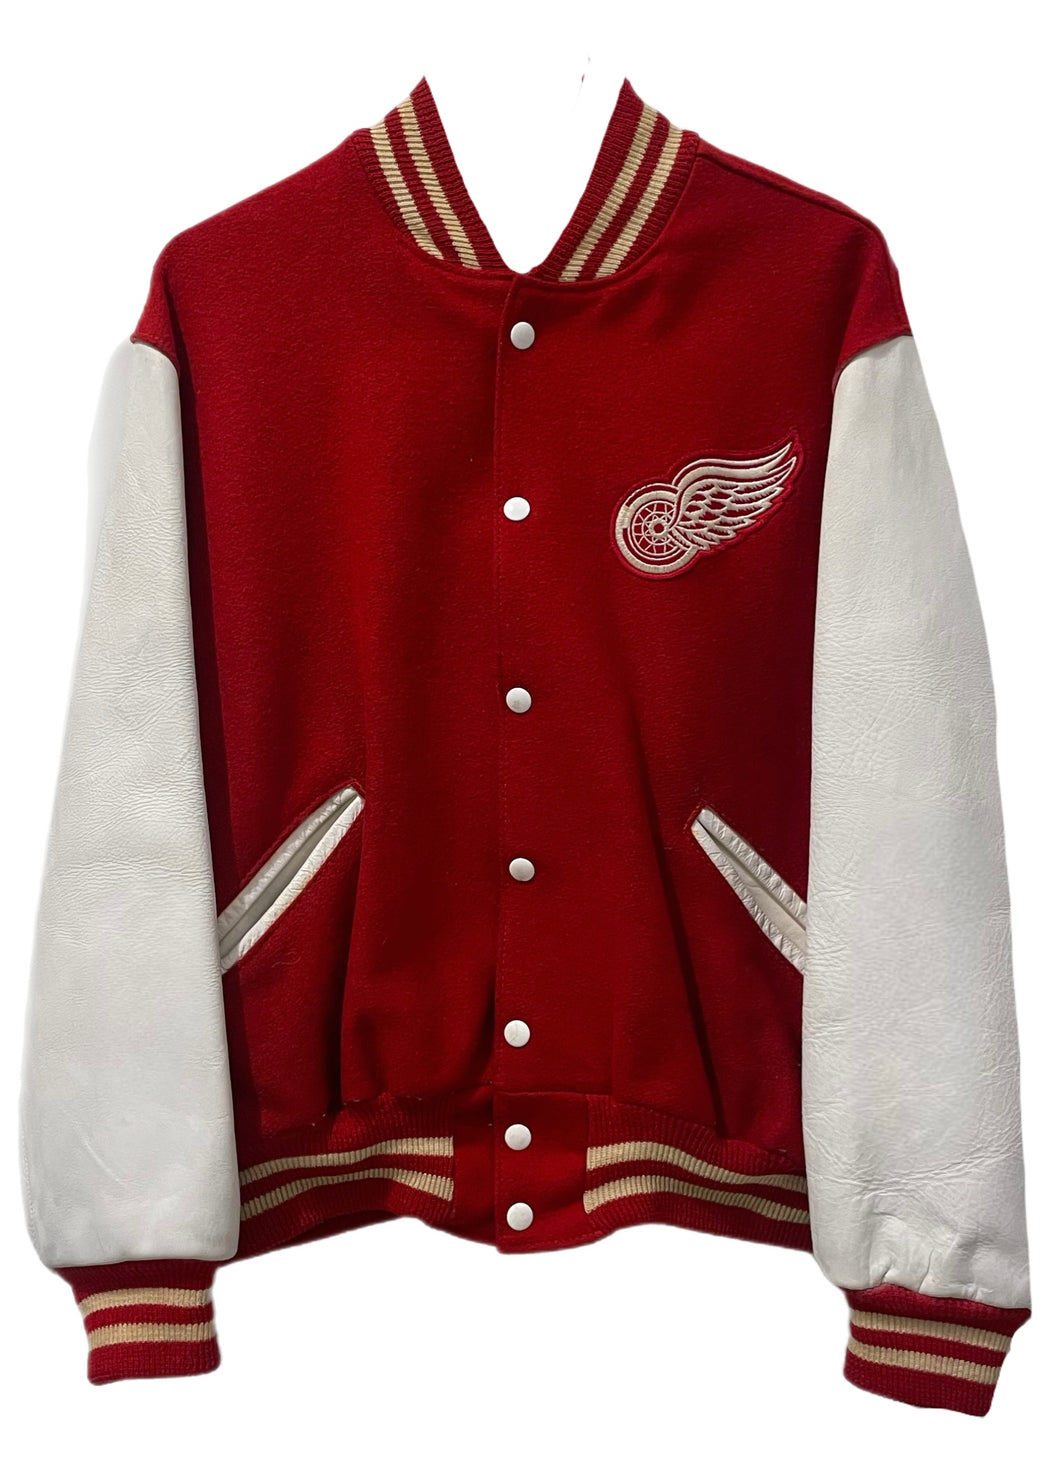 Detroit Red Wings, NHL One of a KIND Vintage Jacket with Crystal Star Design